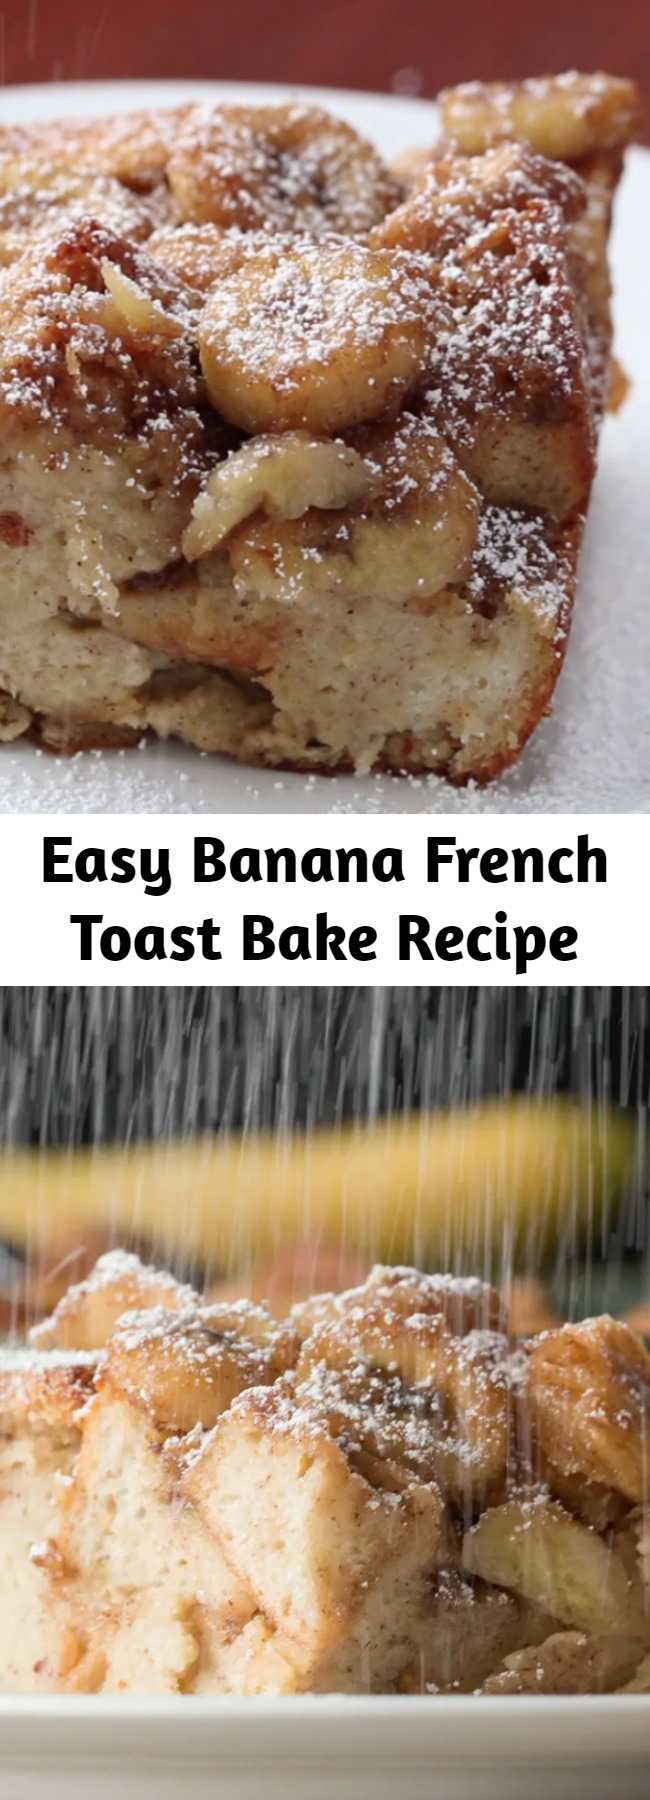 Easy Banana French Toast Bake Recipe - Save time without the hassle of dipping individual pieces and frying on the stove top. Any kind of sandwich bread will work, and you can add any fruit or cream cheese. I used bananas because it's what I had on hand.